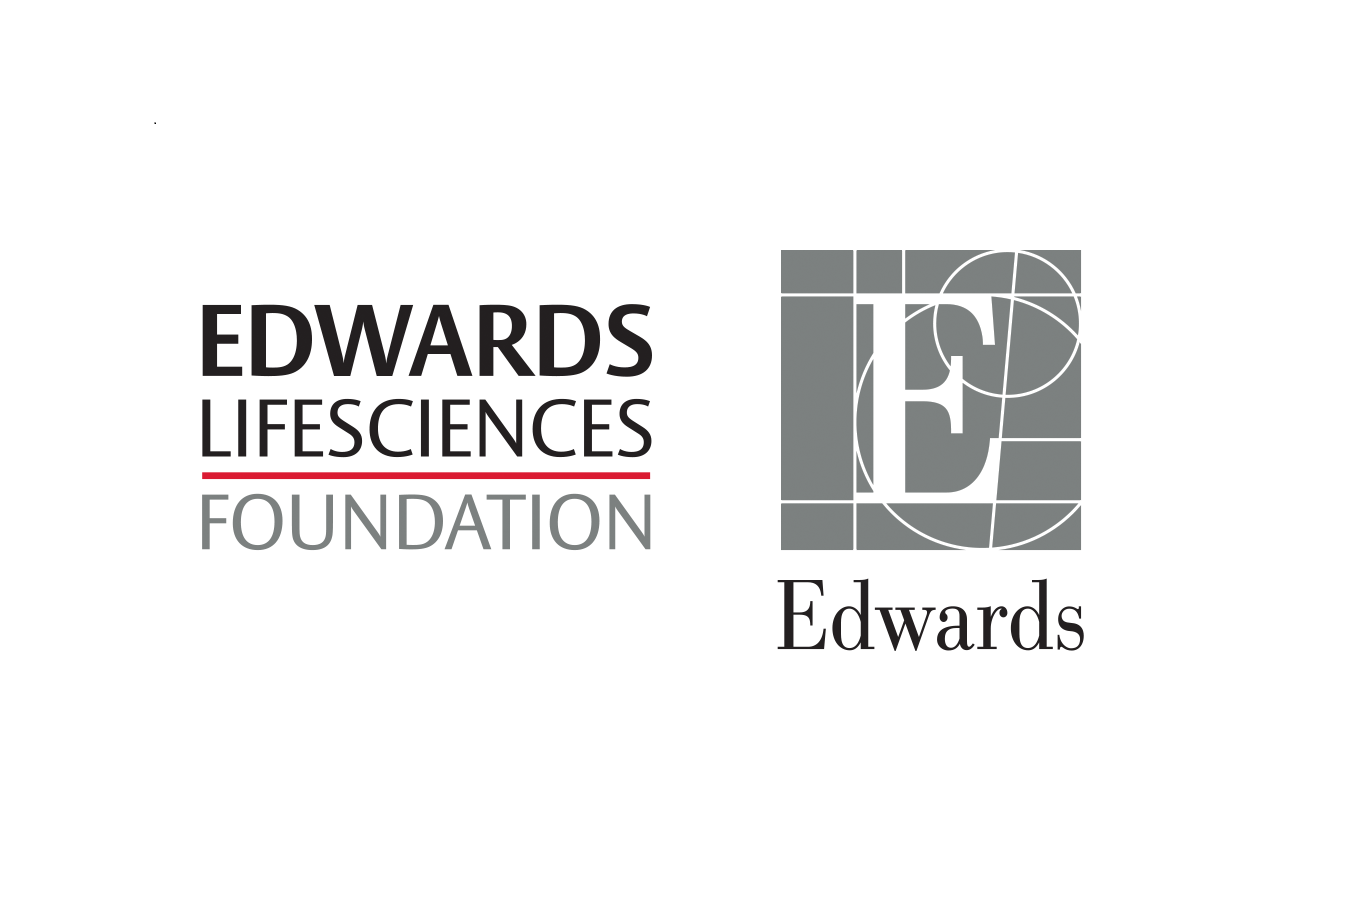 https://www.edwards.com/about-us/global-corporate-giving